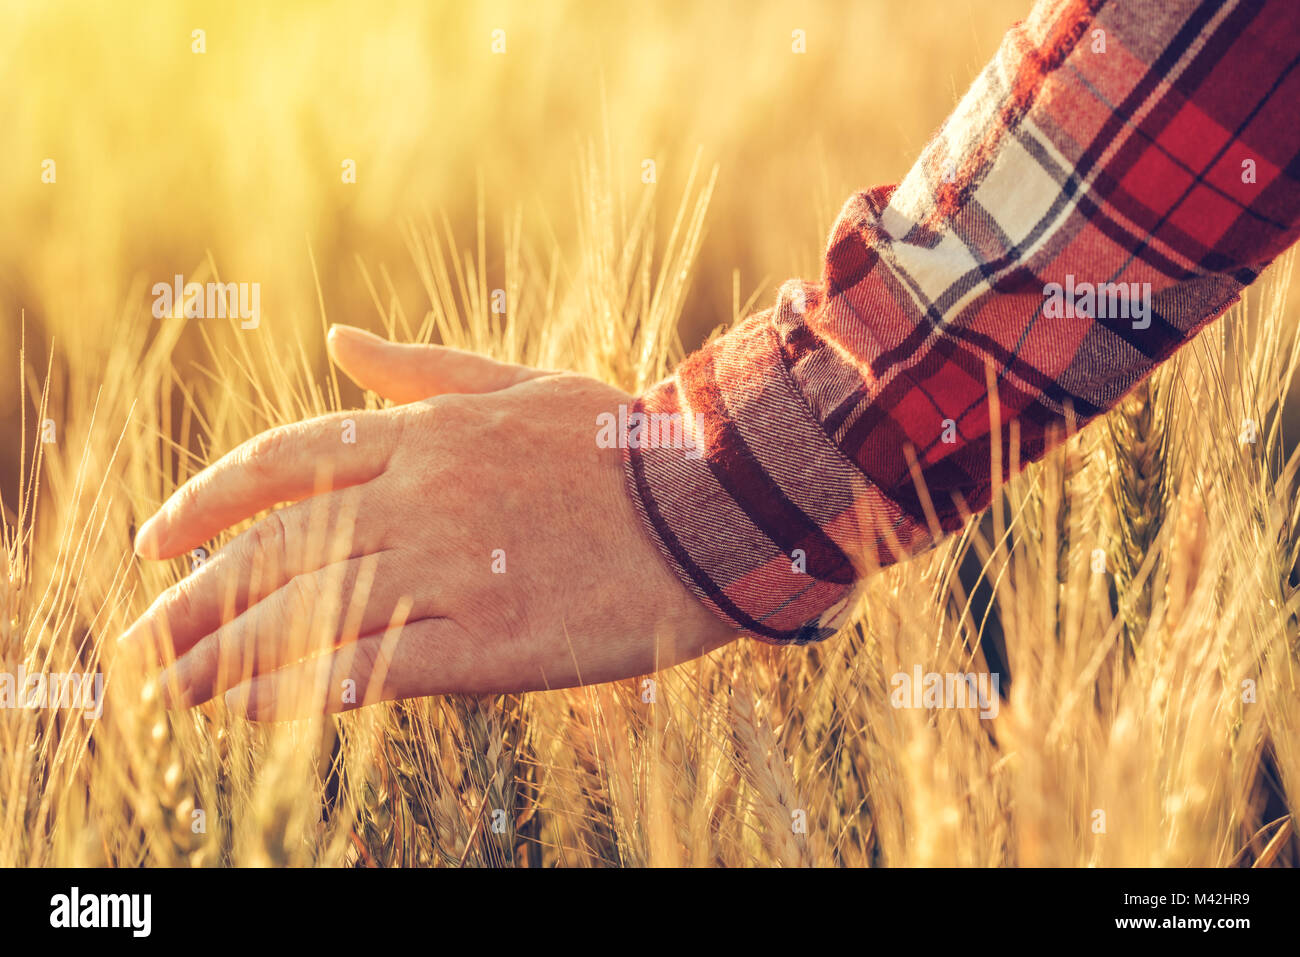 Female farmer in plaid shirt touching wheat crop ears in cultivated agricultural field Stock Photo